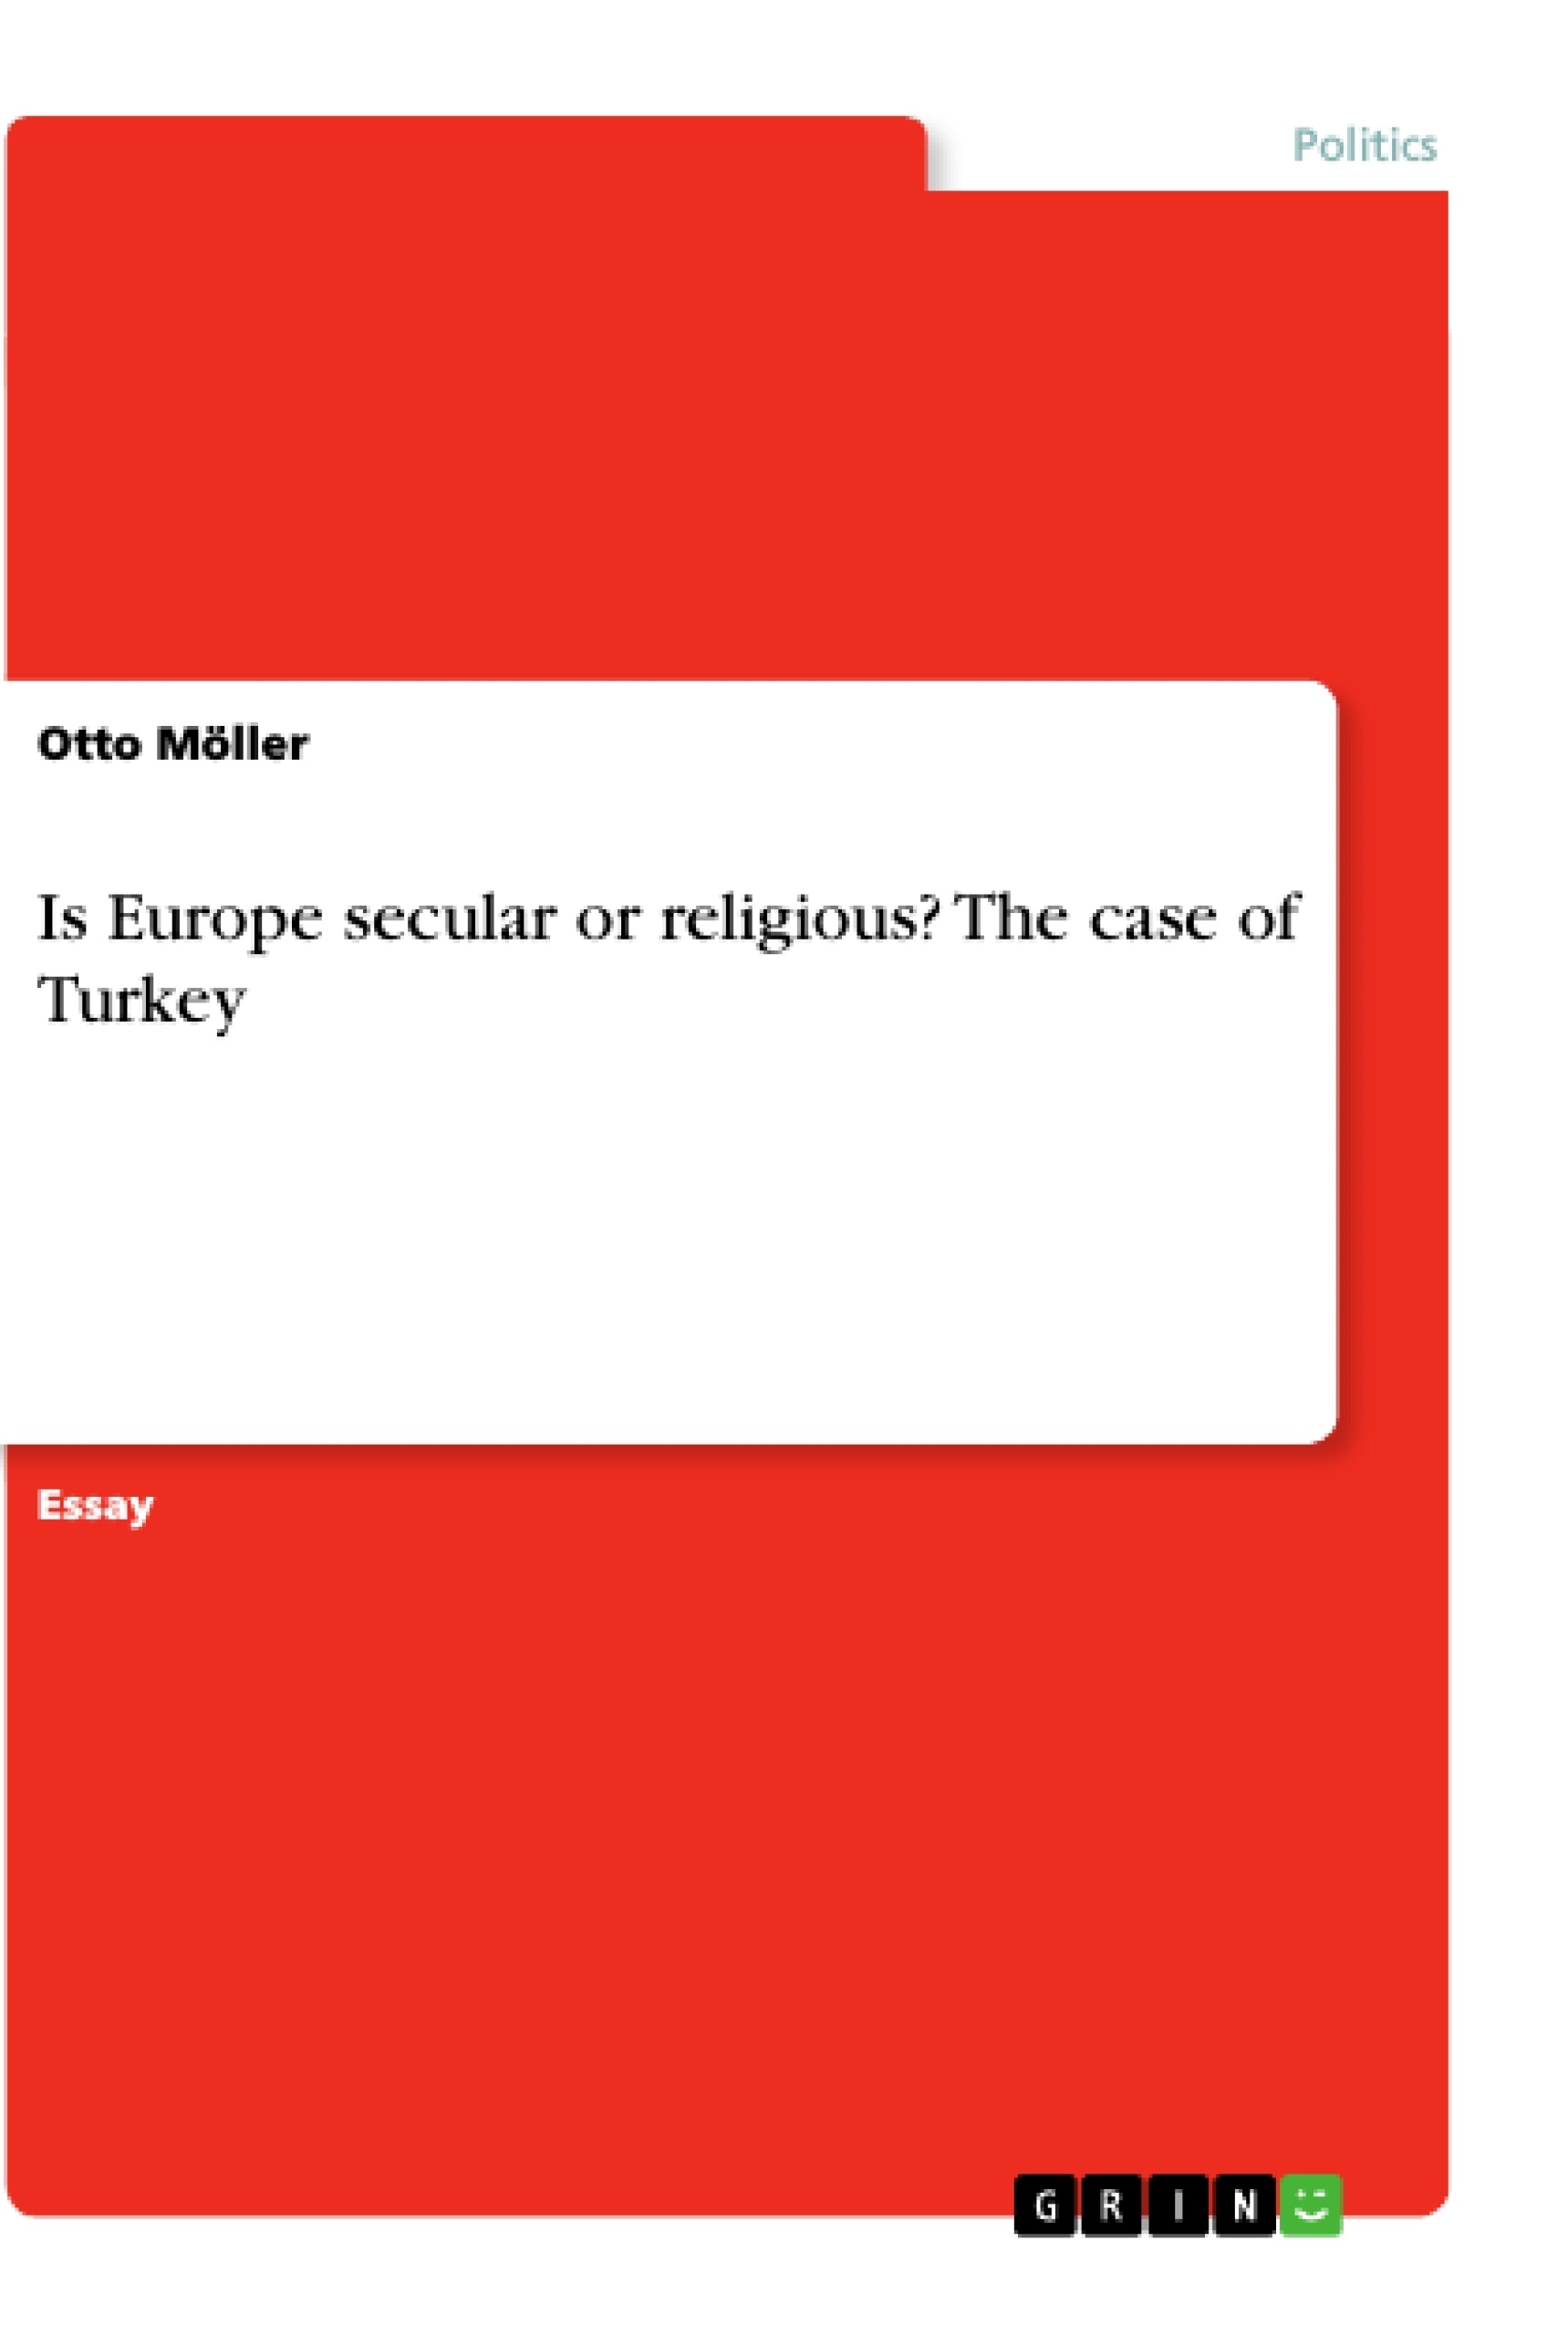 Title: Is Europe secular or religious? The case of Turkey